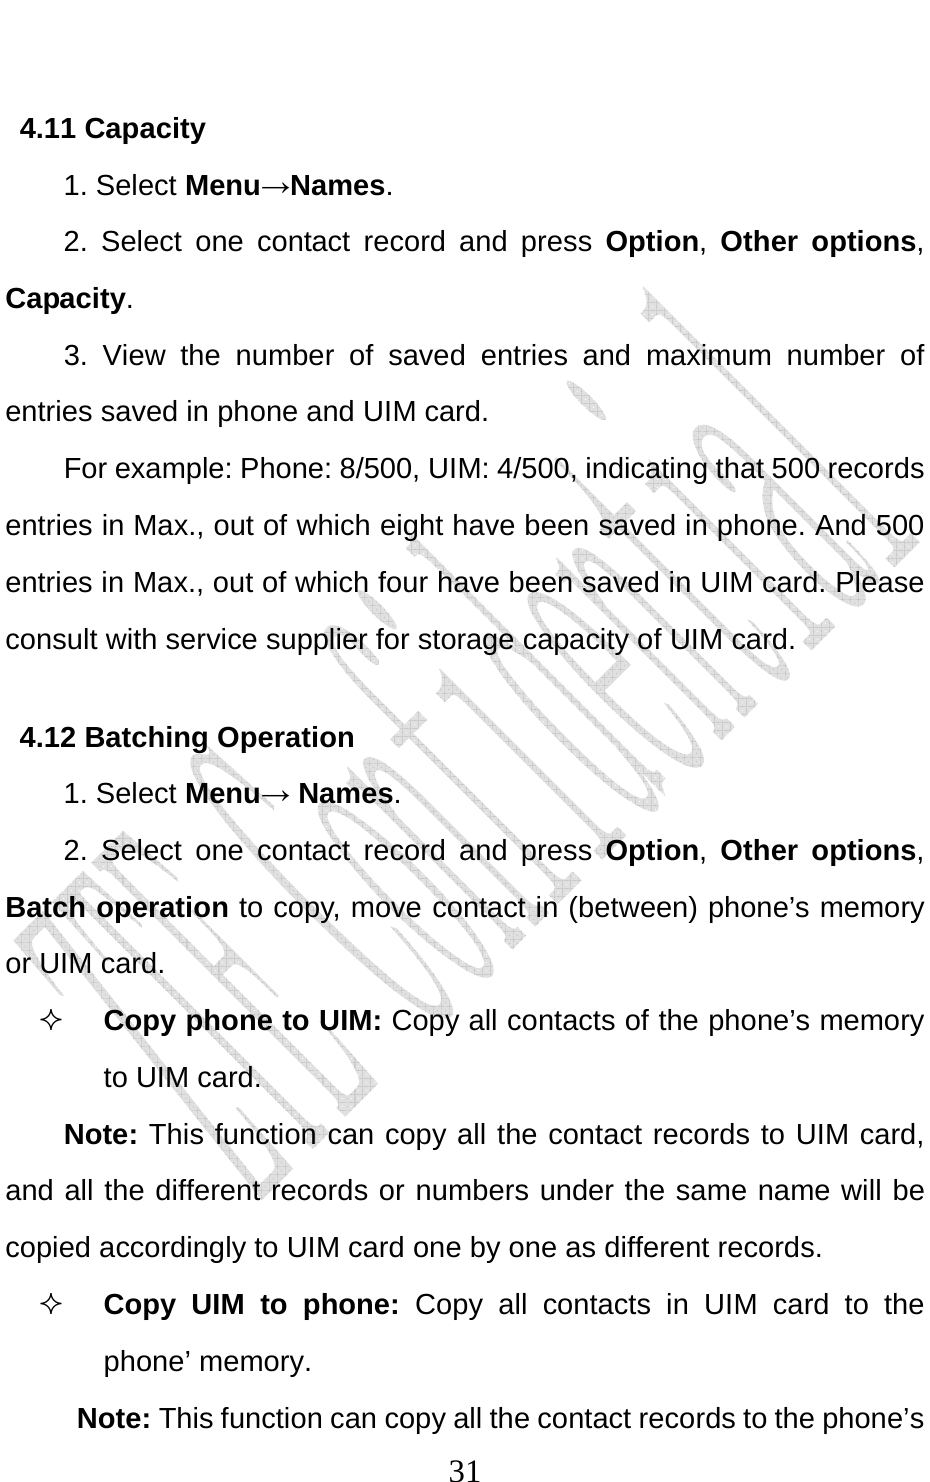                              314.11 Capacity   1. Select Menu→Names. 2. Select one contact record and press Option,  Other options, Capacity. 3. View the number of saved entries and maximum number of entries saved in phone and UIM card.   For example: Phone: 8/500, UIM: 4/500, indicating that 500 records entries in Max., out of which eight have been saved in phone. And 500 entries in Max., out of which four have been saved in UIM card. Please consult with service supplier for storage capacity of UIM card. 4.12 Batching Operation 1. Select Menu→ Names. 2. Select one contact record and press Option,  Other options, Batch operation to copy, move contact in (between) phone’s memory or UIM card.  Copy phone to UIM: Copy all contacts of the phone’s memory to UIM card. Note: This function can copy all the contact records to UIM card, and all the different records or numbers under the same name will be copied accordingly to UIM card one by one as different records.    Copy UIM to phone: Copy all contacts in UIM card to the phone’ memory. Note: This function can copy all the contact records to the phone’s 